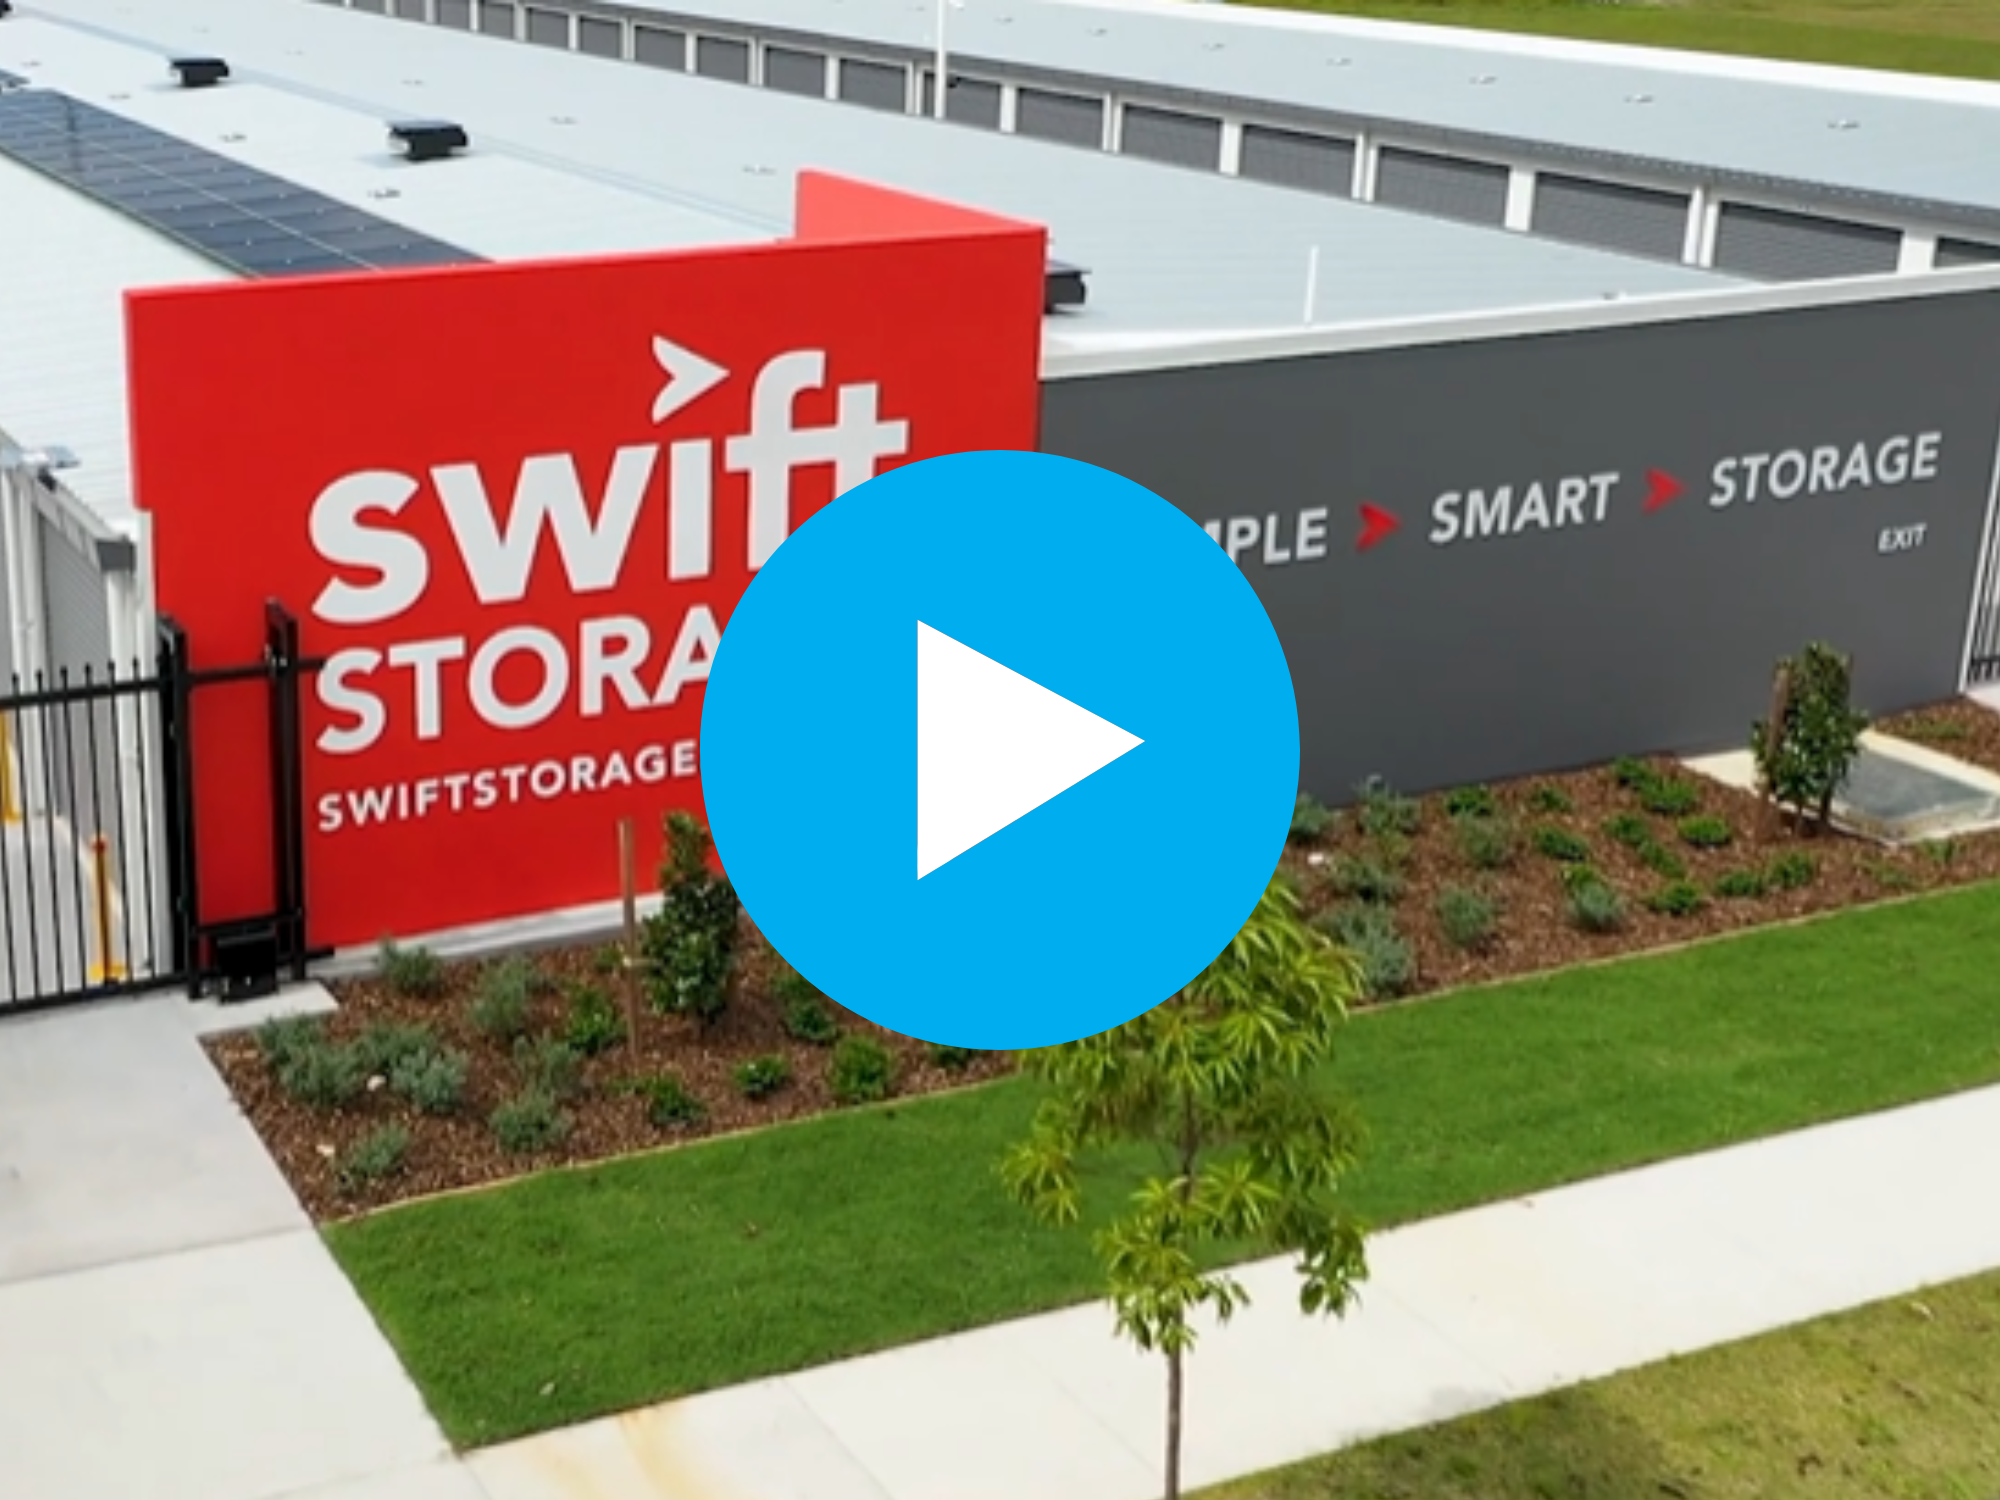 Swift Storage Video on Automated Rentals